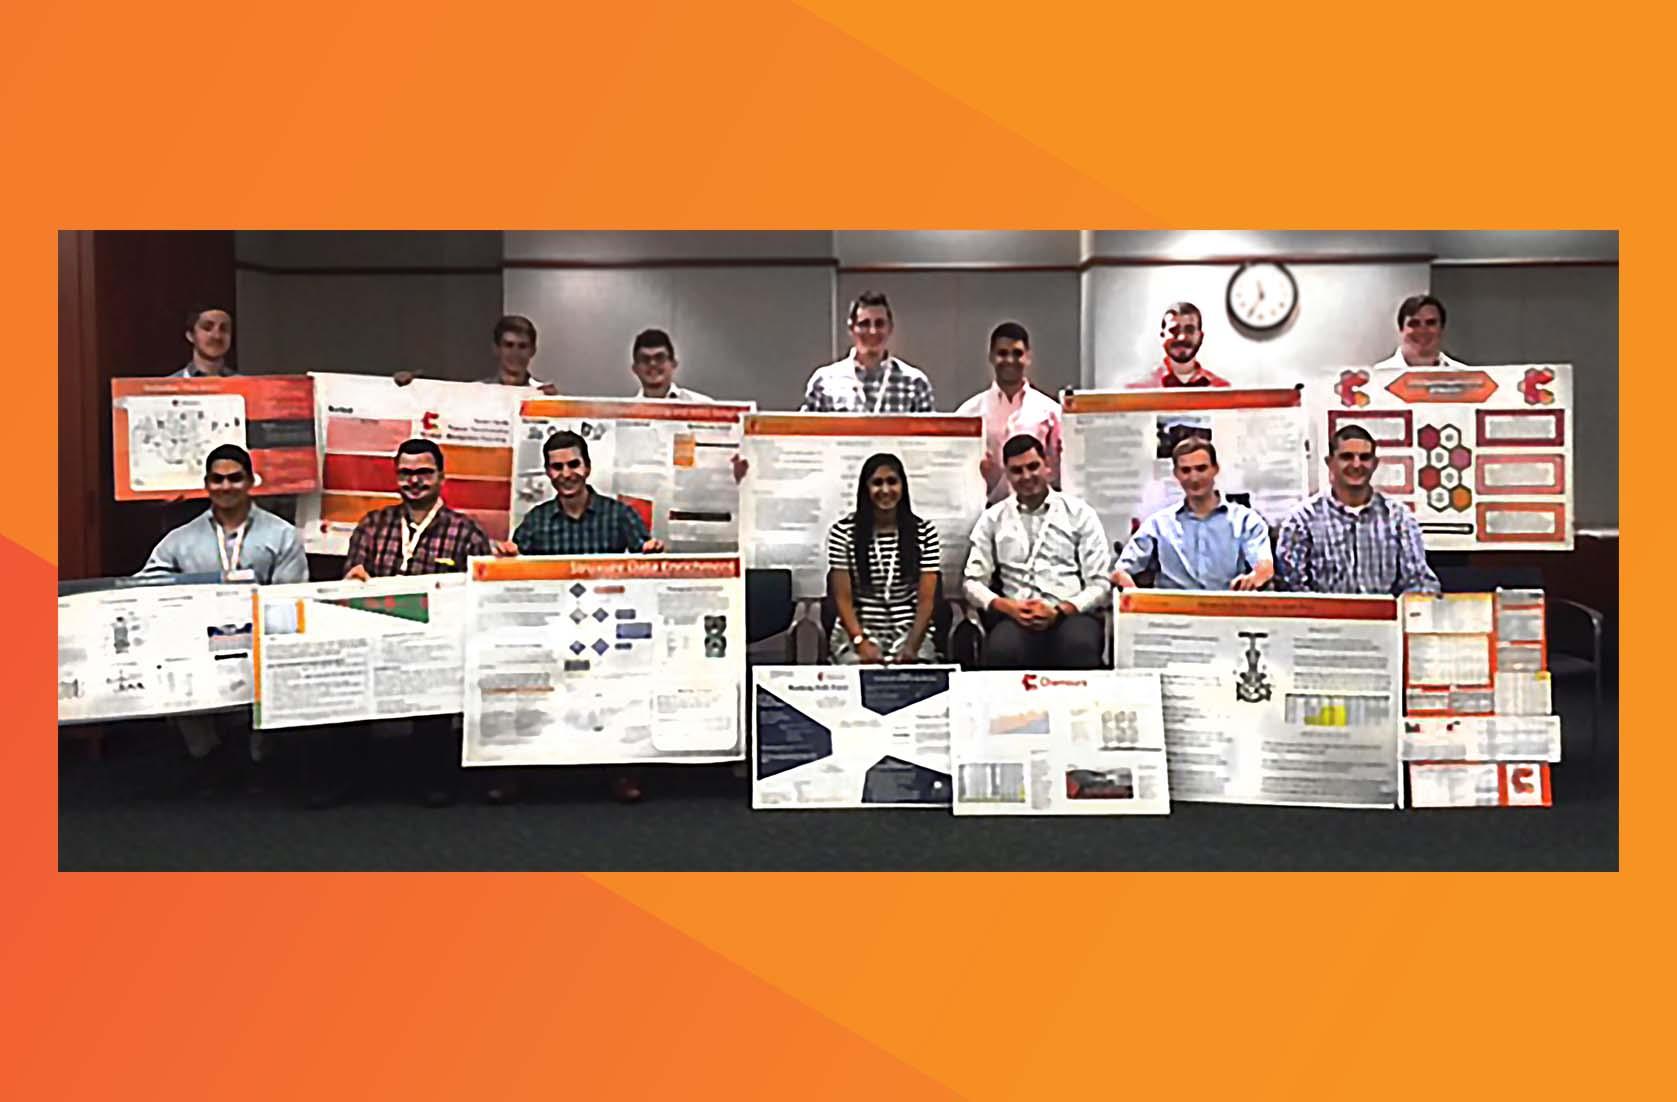 summer interns participate in hands-on activities and deliver final presentations